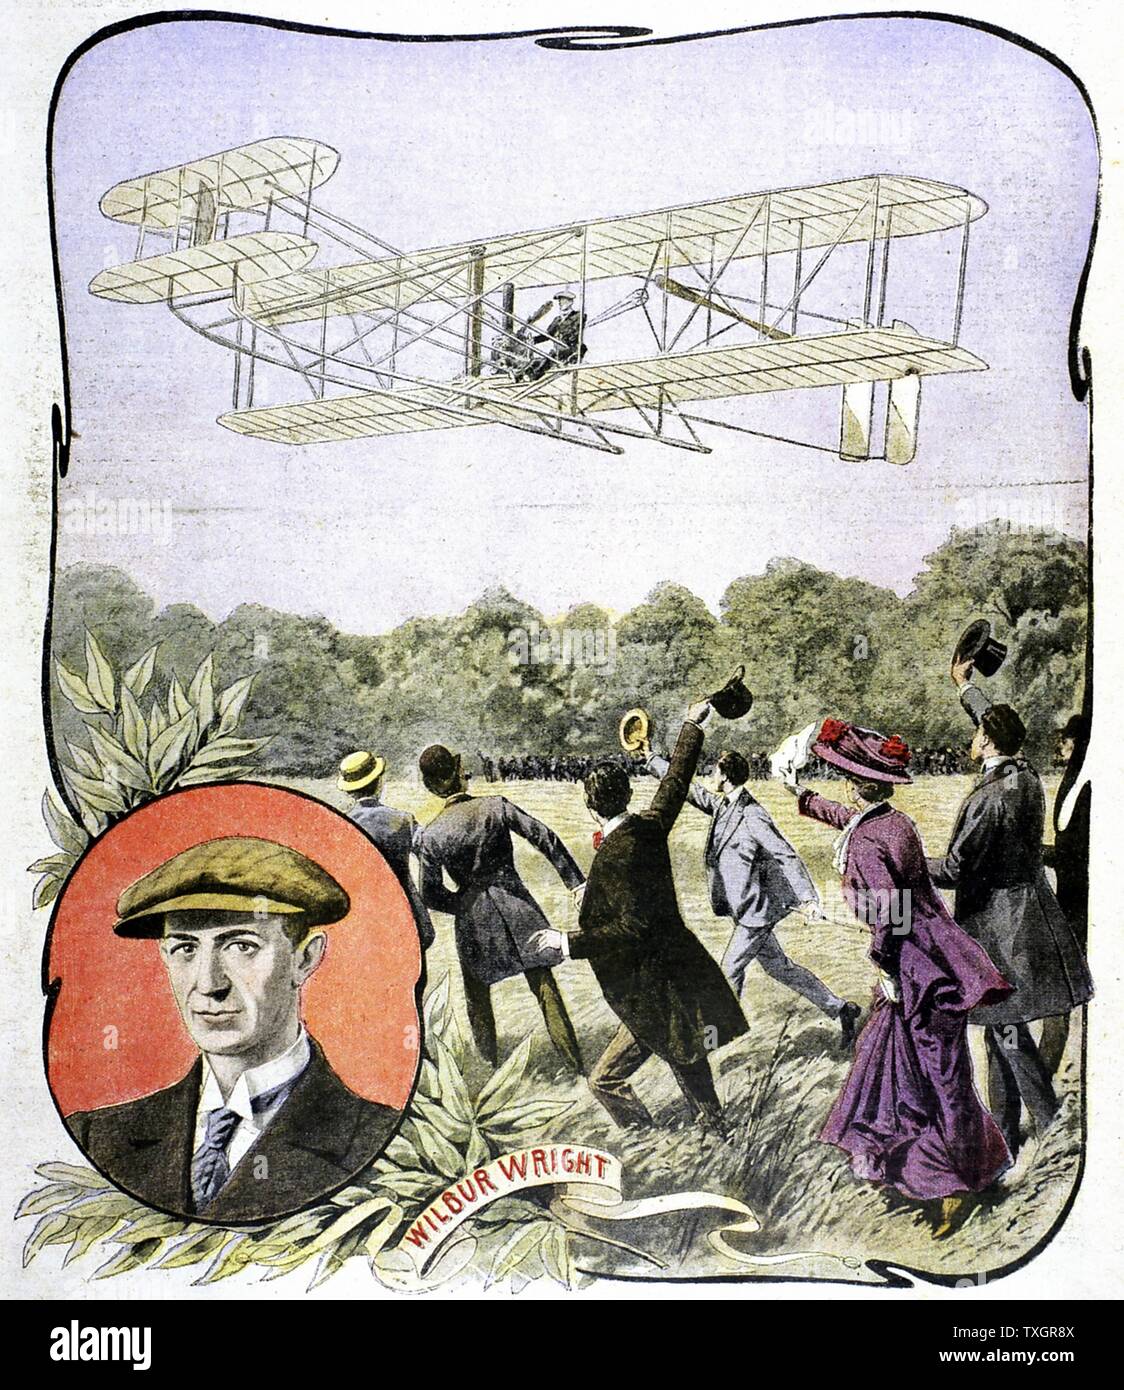 Wilbur Wright's (American aviator) first flight in Europe, at the Hunaudieres racetrack near Le Mans, France in the Wright Brothers' 'Flyer', August 1908 Illustration from 'Le Petit Journal' Paris, August 30, 1908 Stock Photo